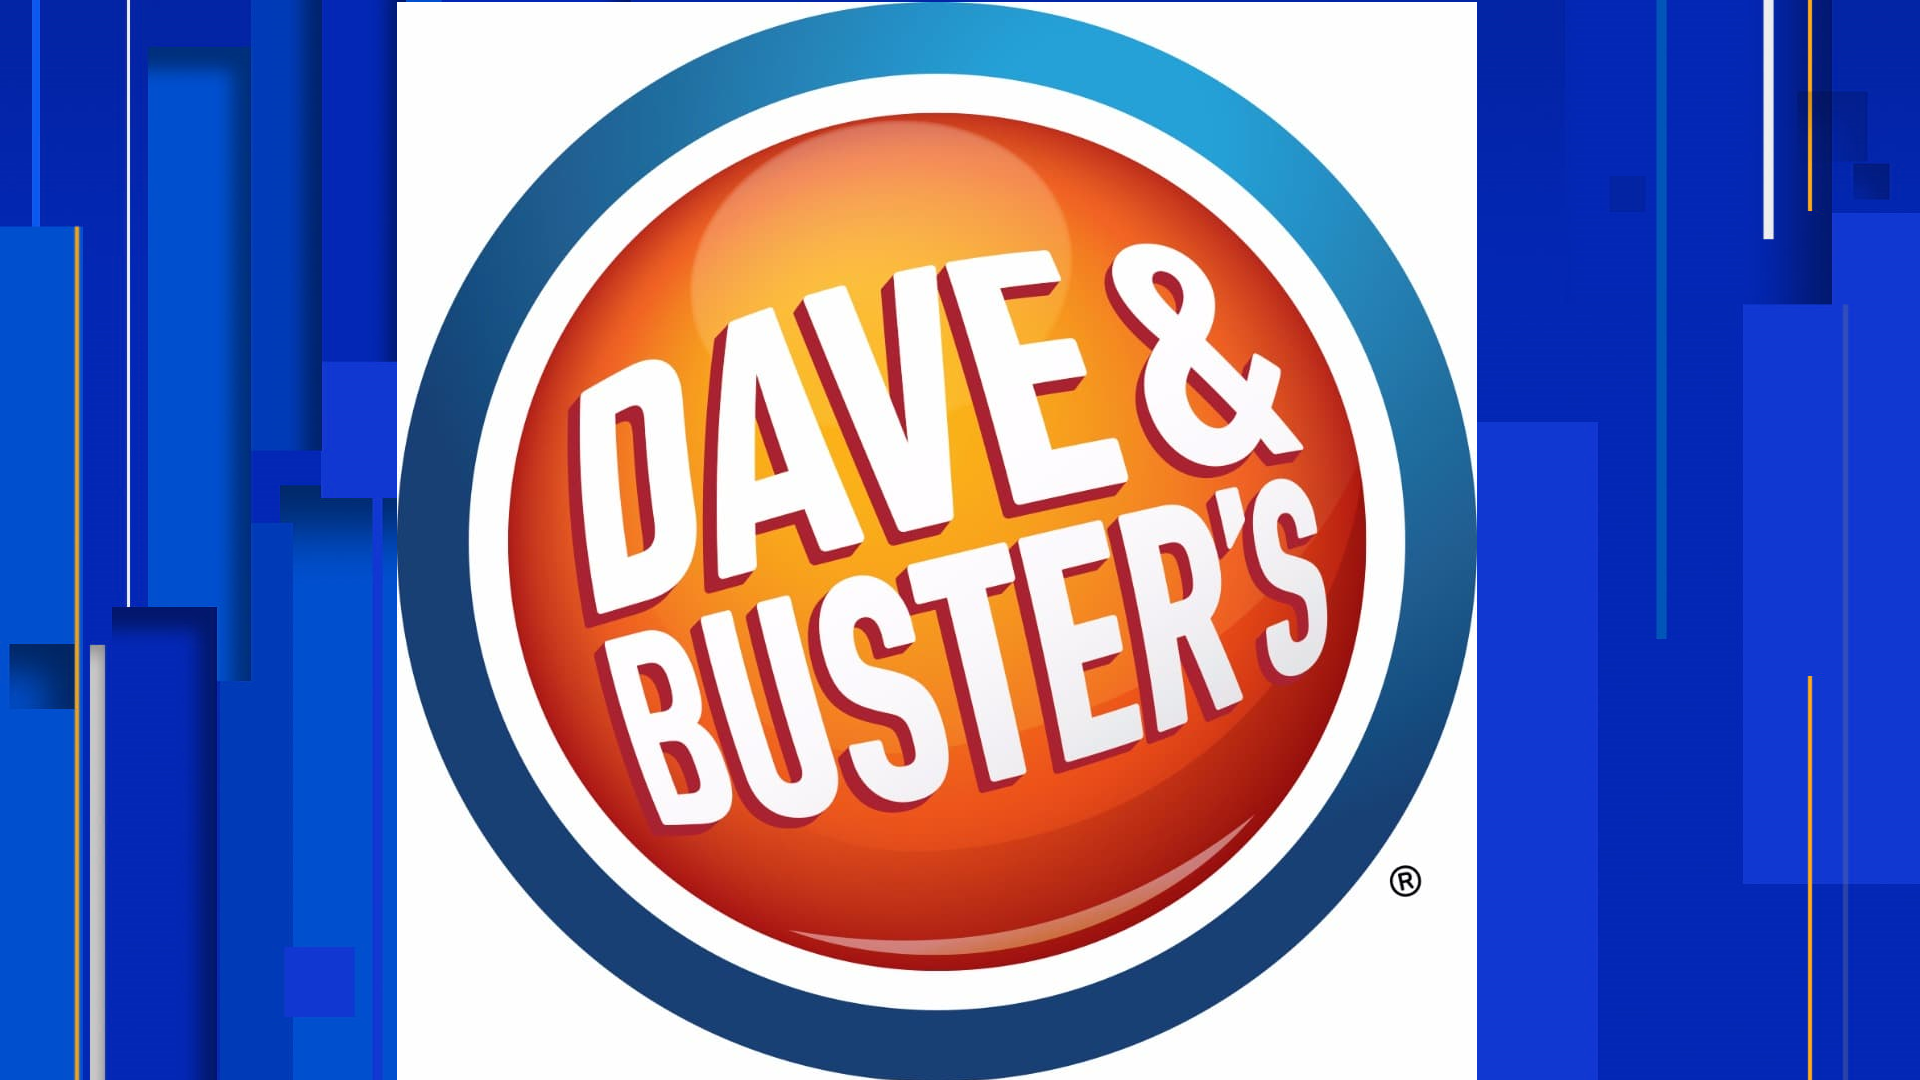 Co-founder of Dave & Buster's, James 'Buster' Corley, dies